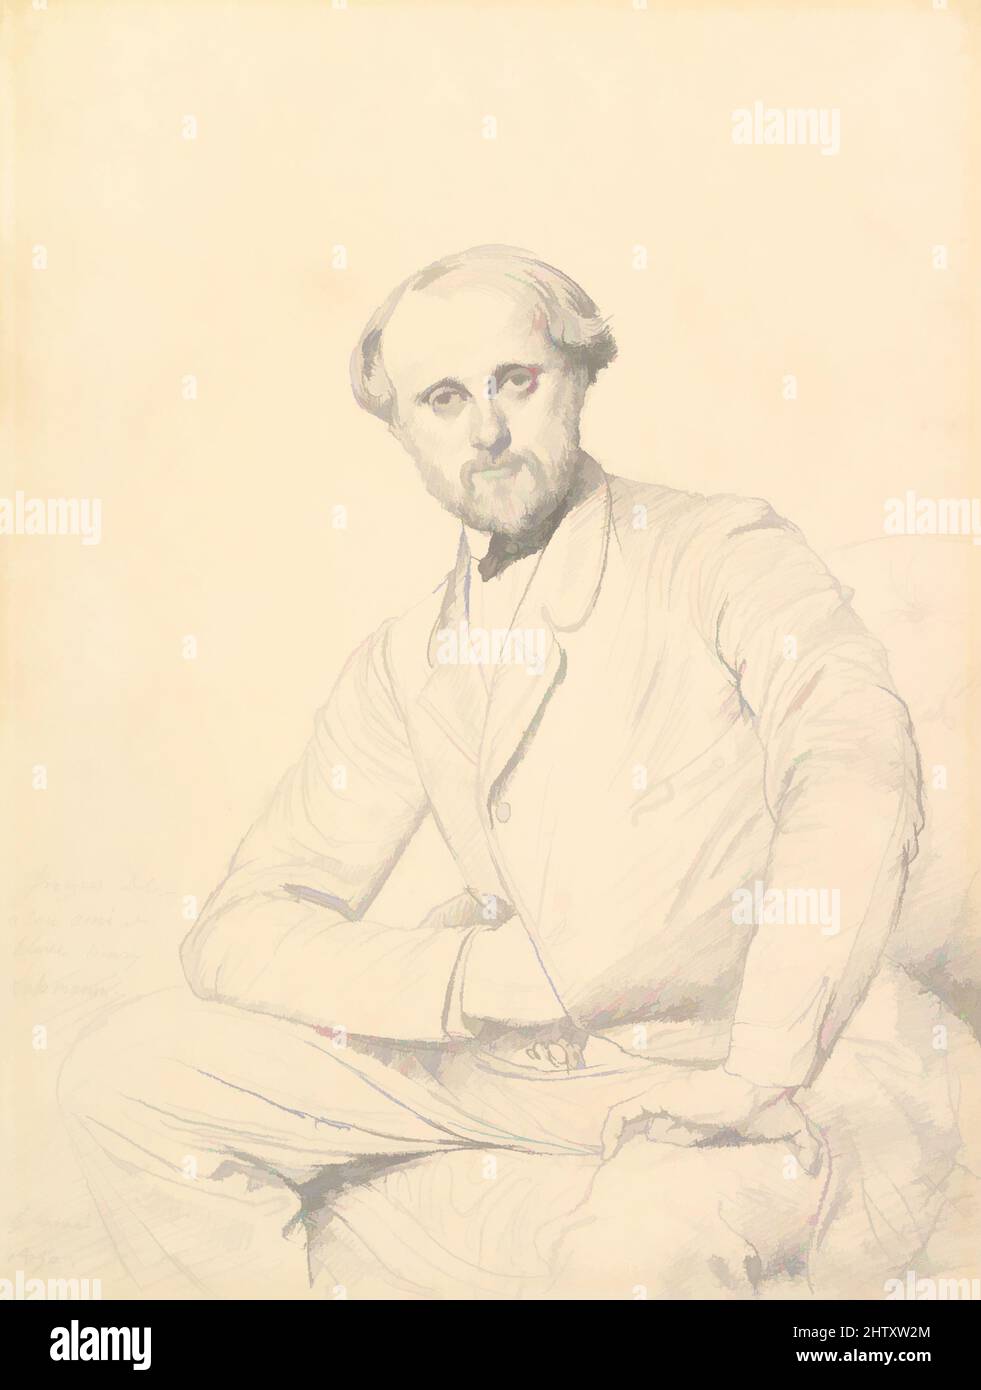 Art inspired by Henri Lehmann, 1850, Graphite on wove paper, Sheet: 12 1/2 x 9 3/8 in. (31.7 x 23.8 cm), Drawings, Jean Auguste Dominique Ingres (French, Montauban 1780–1867 Paris, Classic works modernized by Artotop with a splash of modernity. Shapes, color and value, eye-catching visual impact on art. Emotions through freedom of artworks in a contemporary way. A timeless message pursuing a wildly creative new direction. Artists turning to the digital medium and creating the Artotop NFT Stock Photo